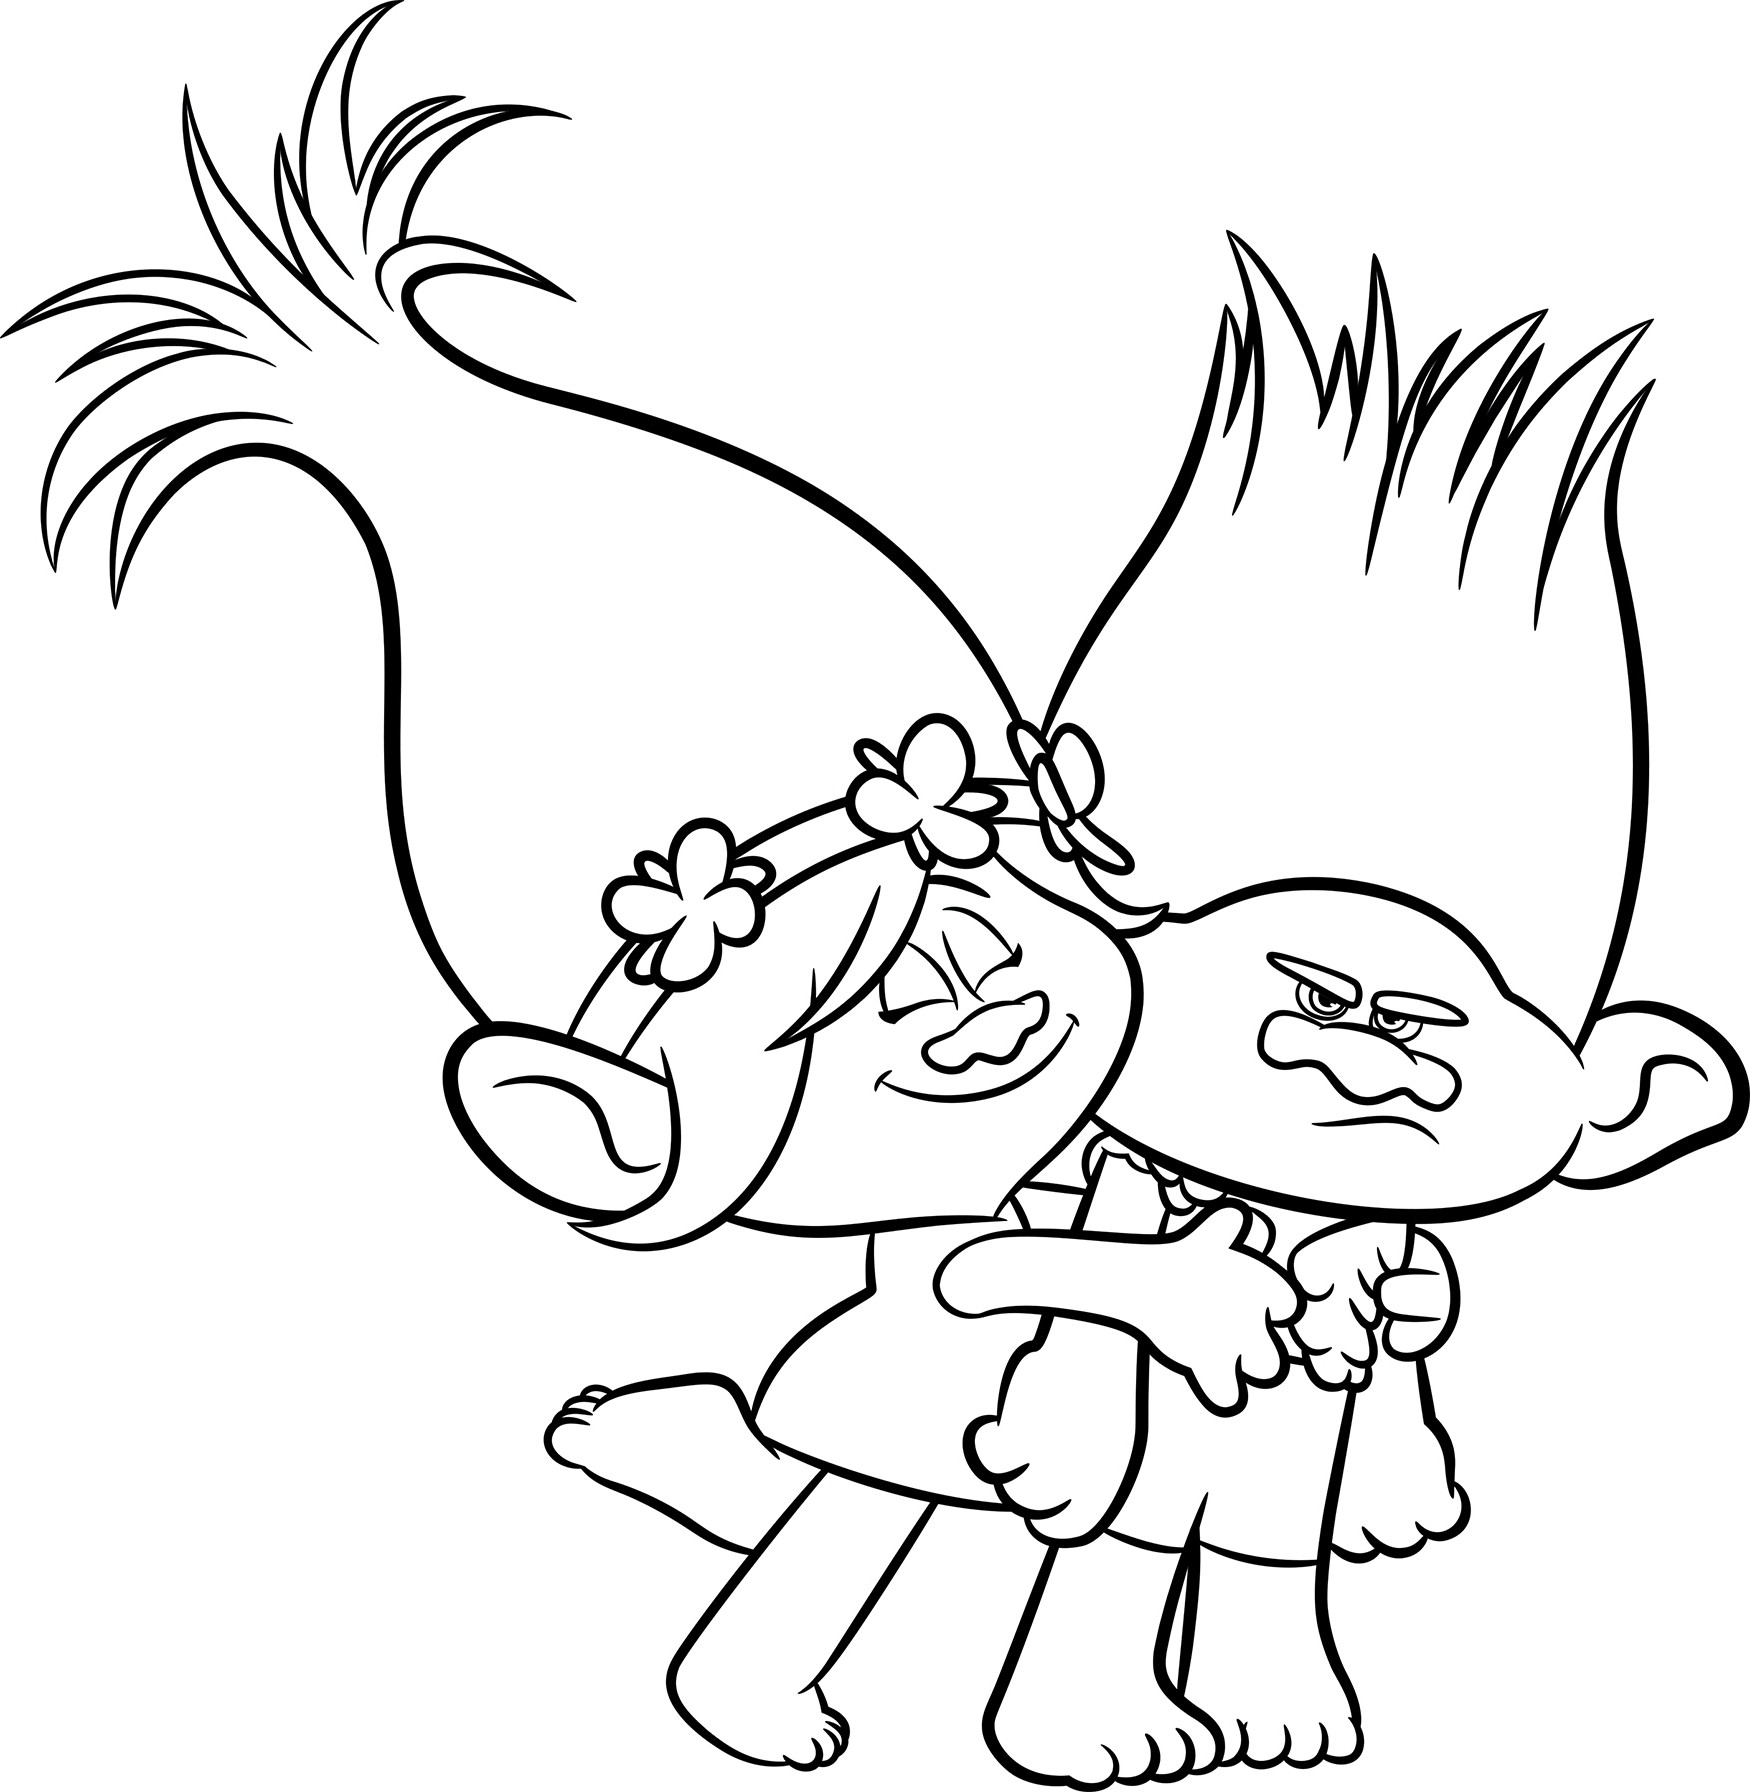 Delighted Dreamworks Trolls Coloring Pages Poppy And Branch Fun With Learnfree Me